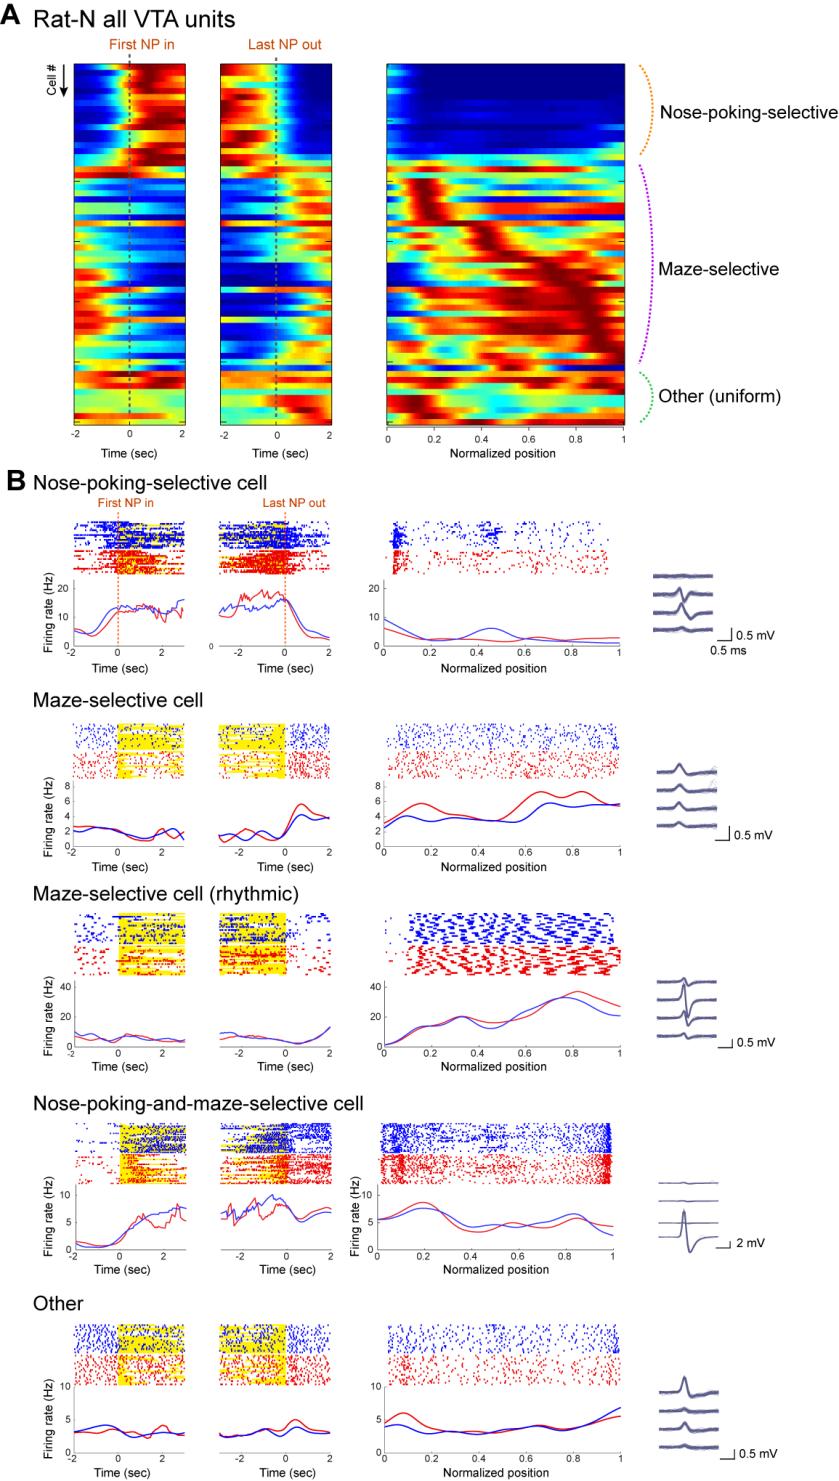 Figure S5. Behavior-related firing patterns of VTA neurons in the working memory task. Using the simplest categorization, we identified three behavioral correlates of firing patterns in VTA neurons.